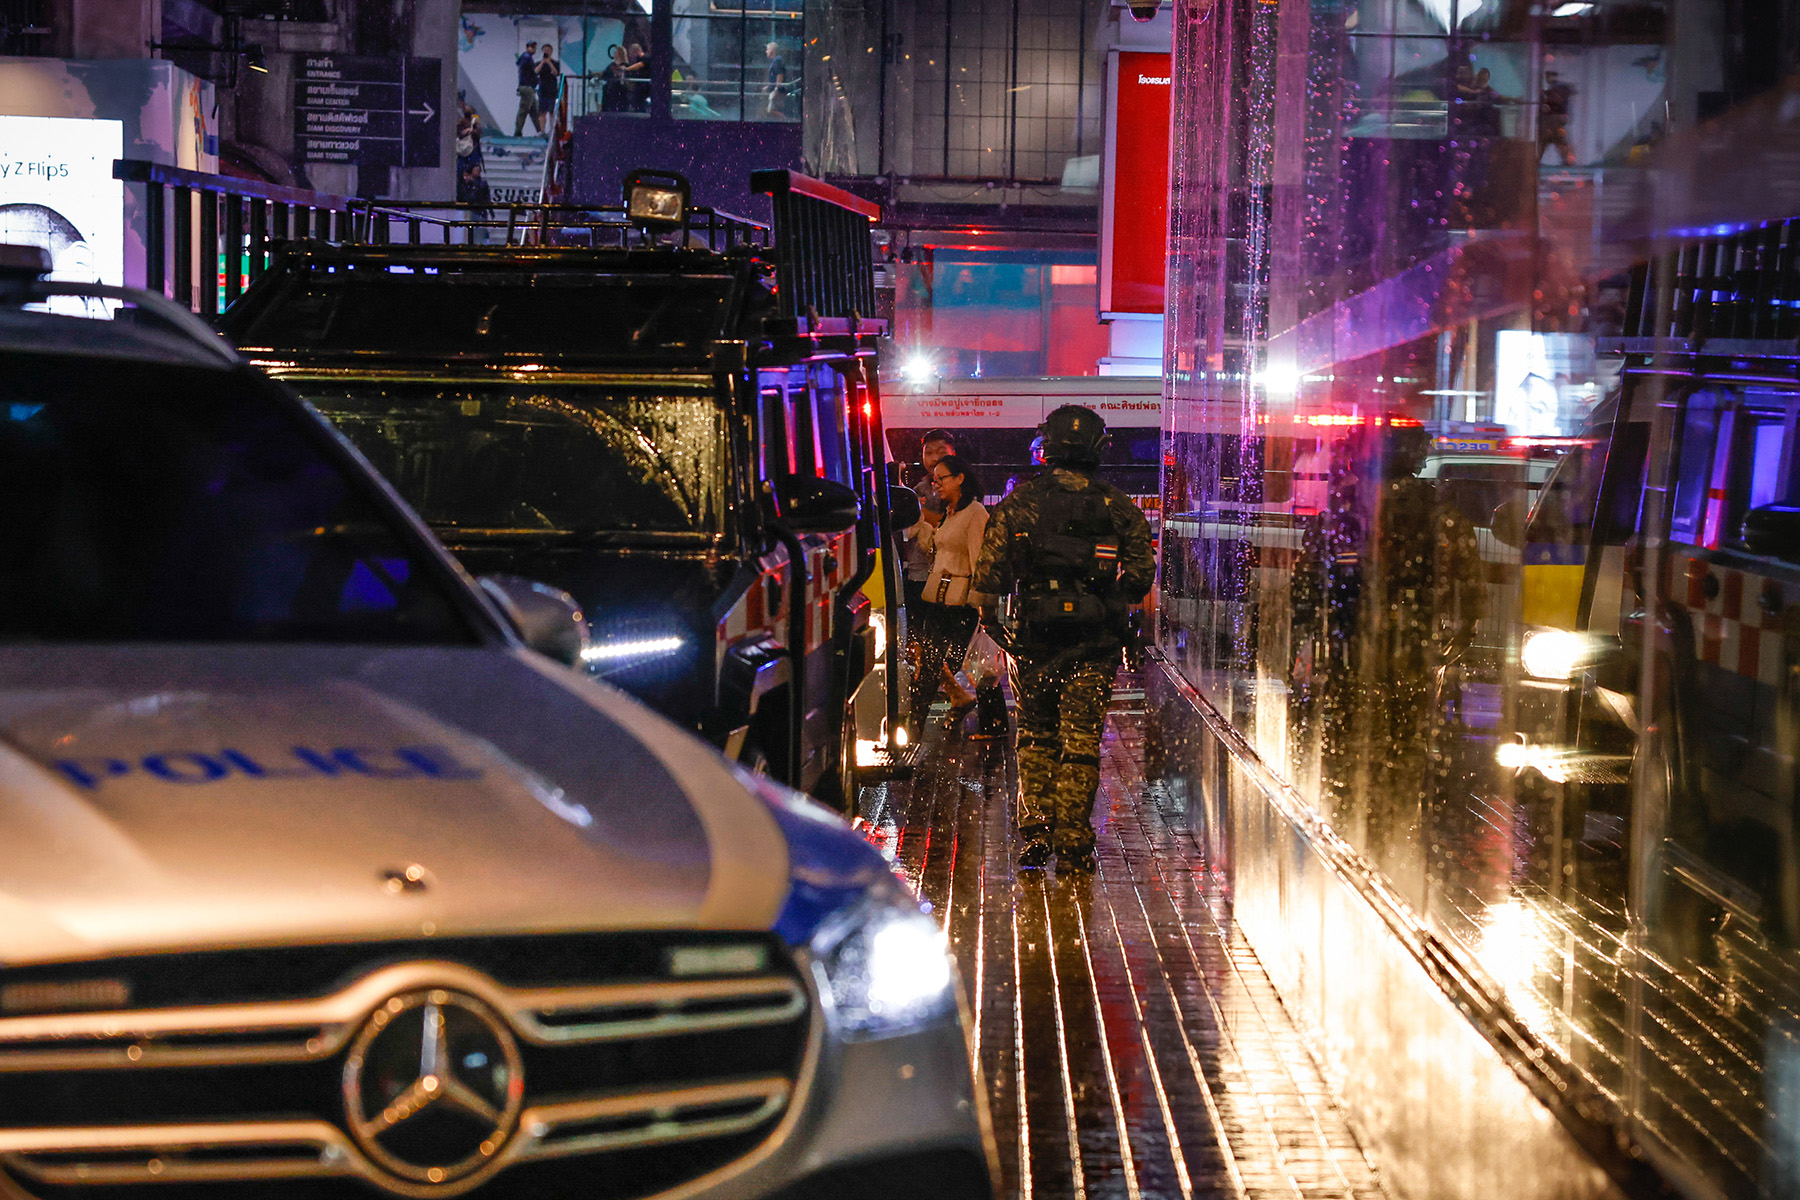 Night time, police vehicle in front, armed police officer walks away towards Bangkok Mall